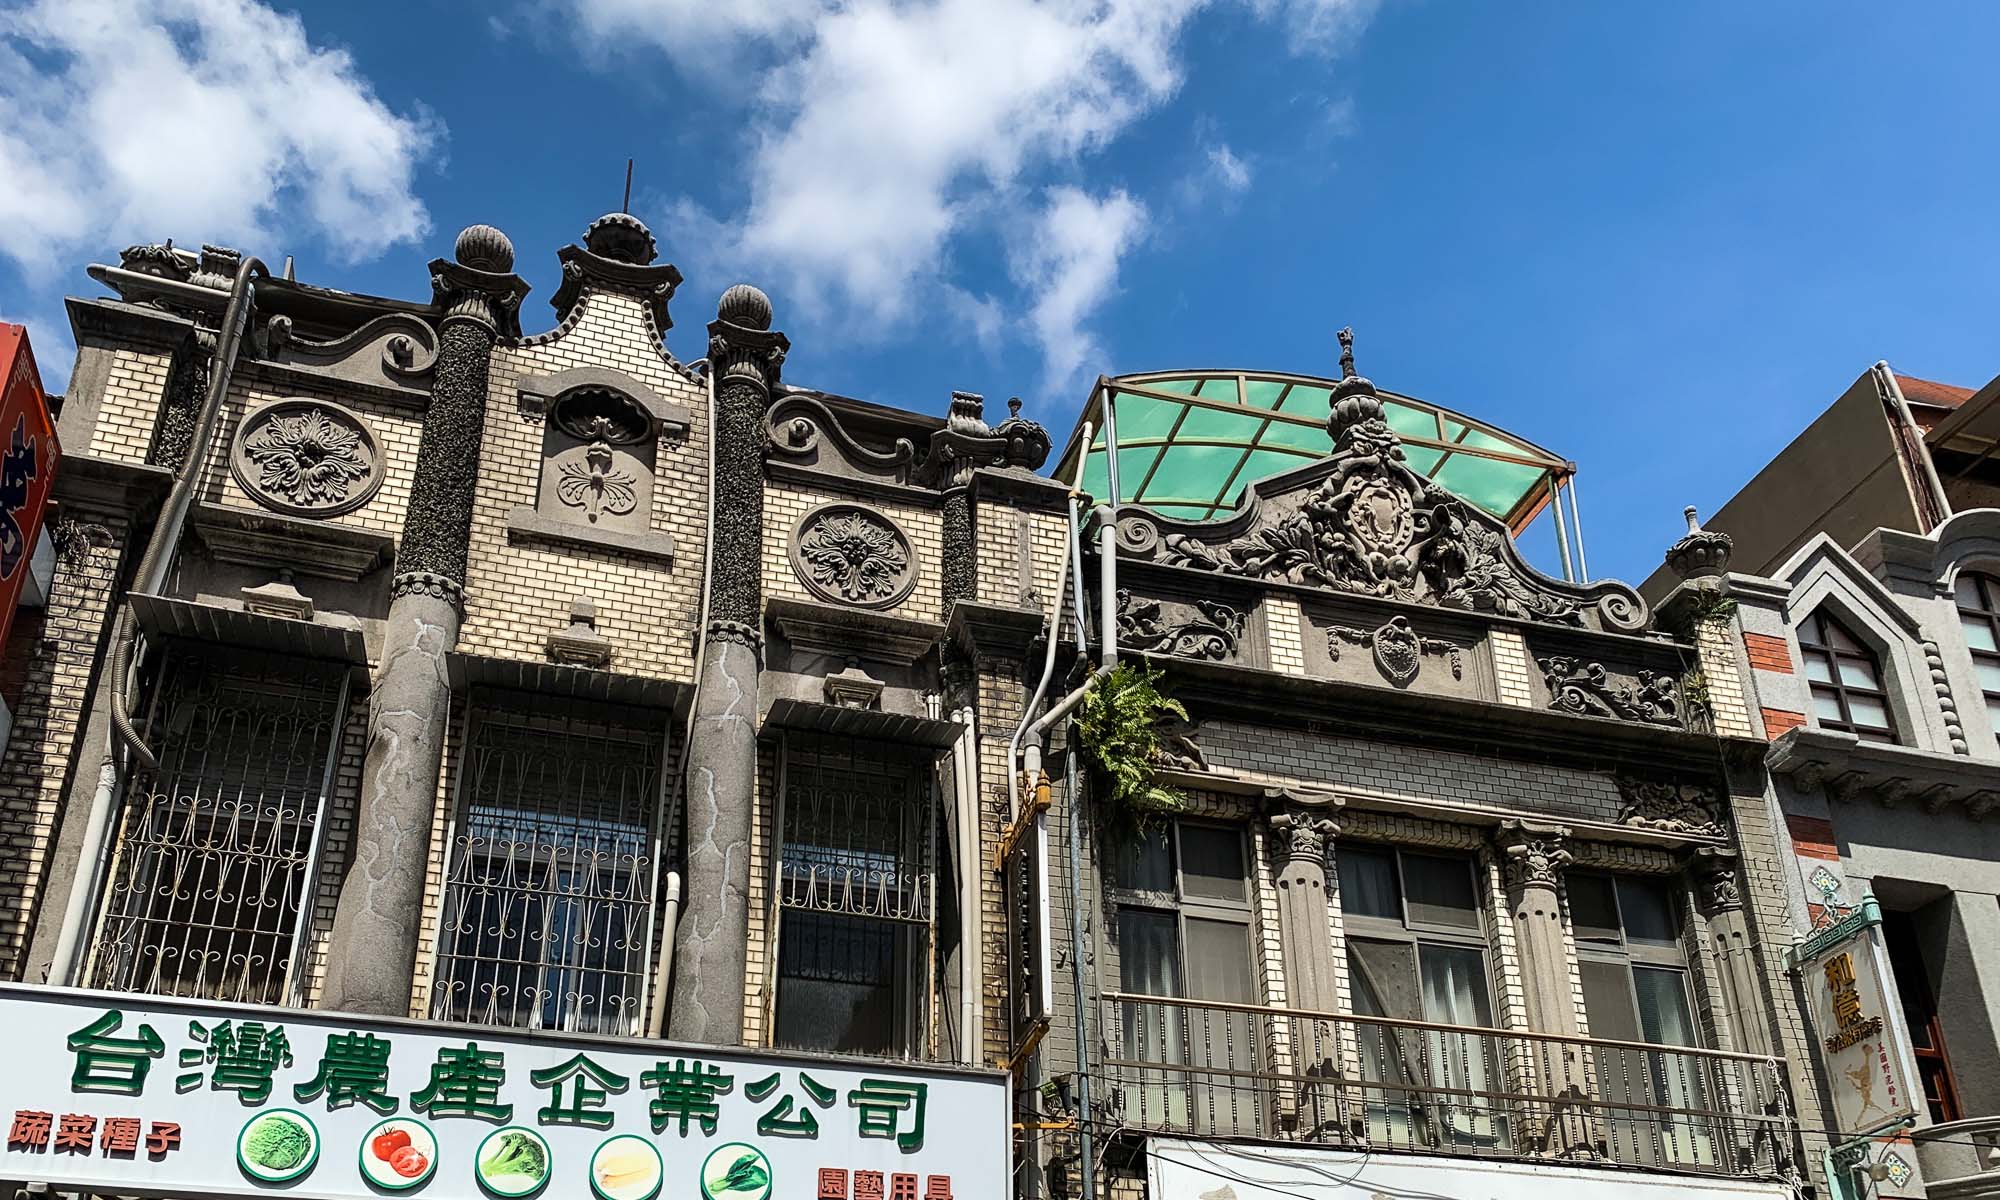 Facades from as far back as 1850 are one of the main attractions at Taipei's Dihua Street.